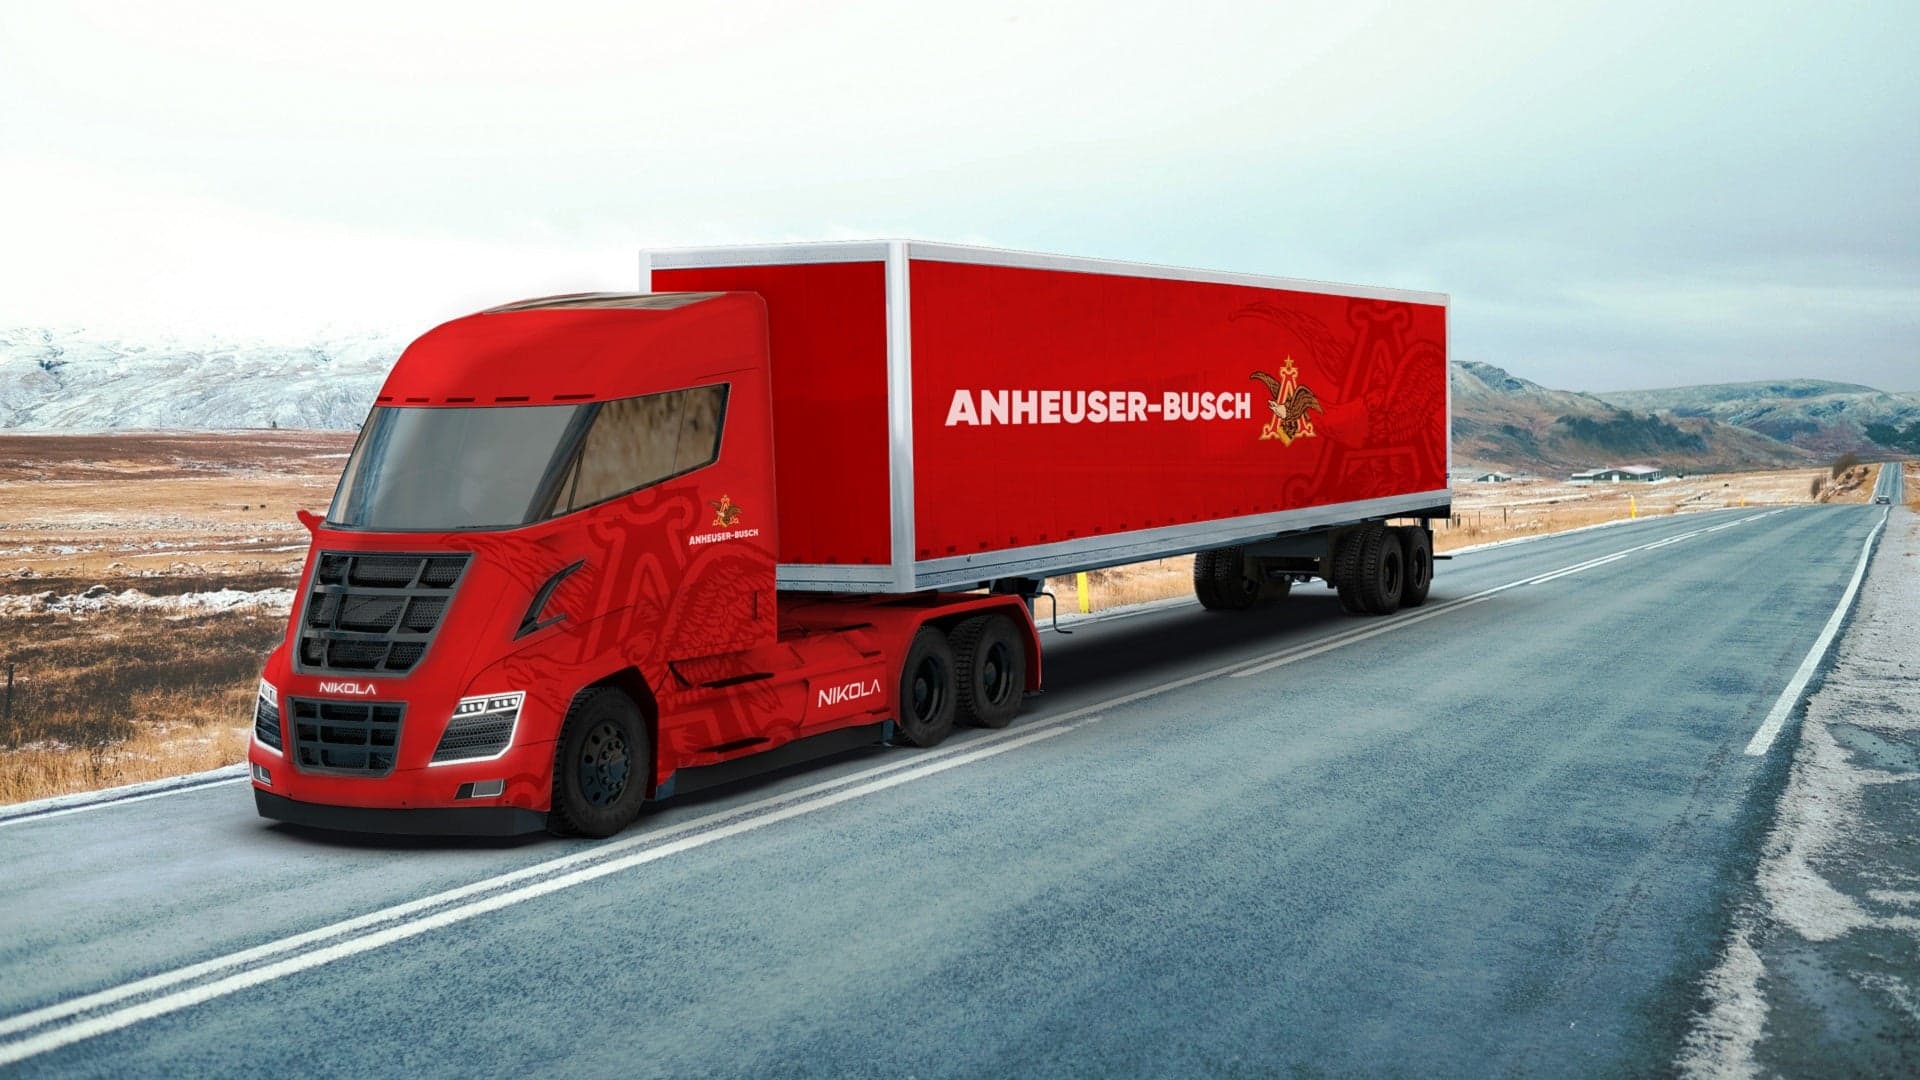 Tesla Rival Nikola Lands Semi-Truck Deal with King of Beers, Anheuser-Busch